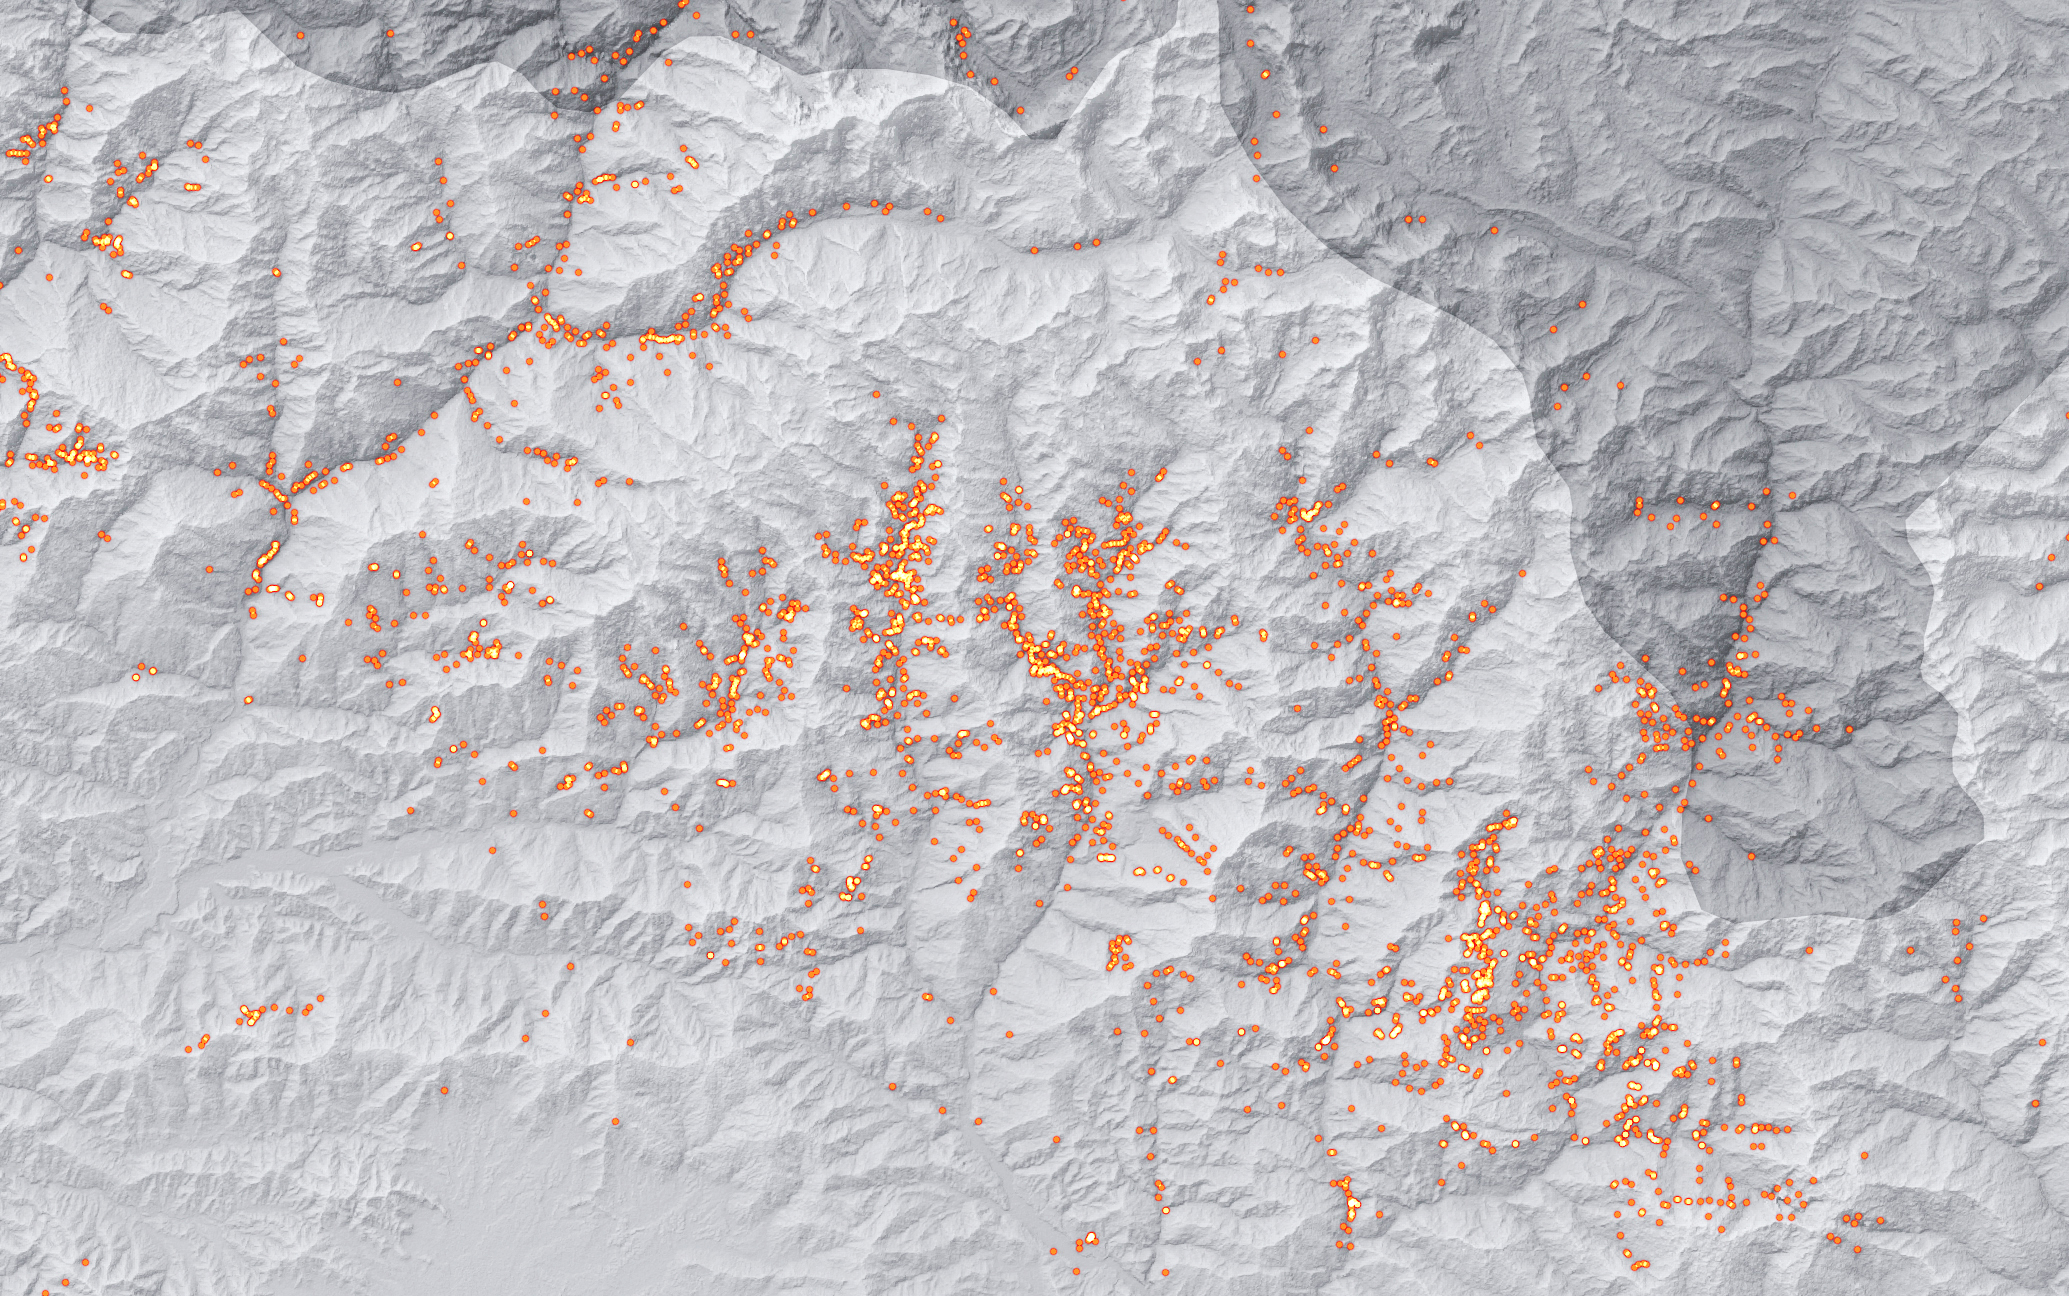 Taking Stock of Landslides after the Gorkha Earthquake - related image preview